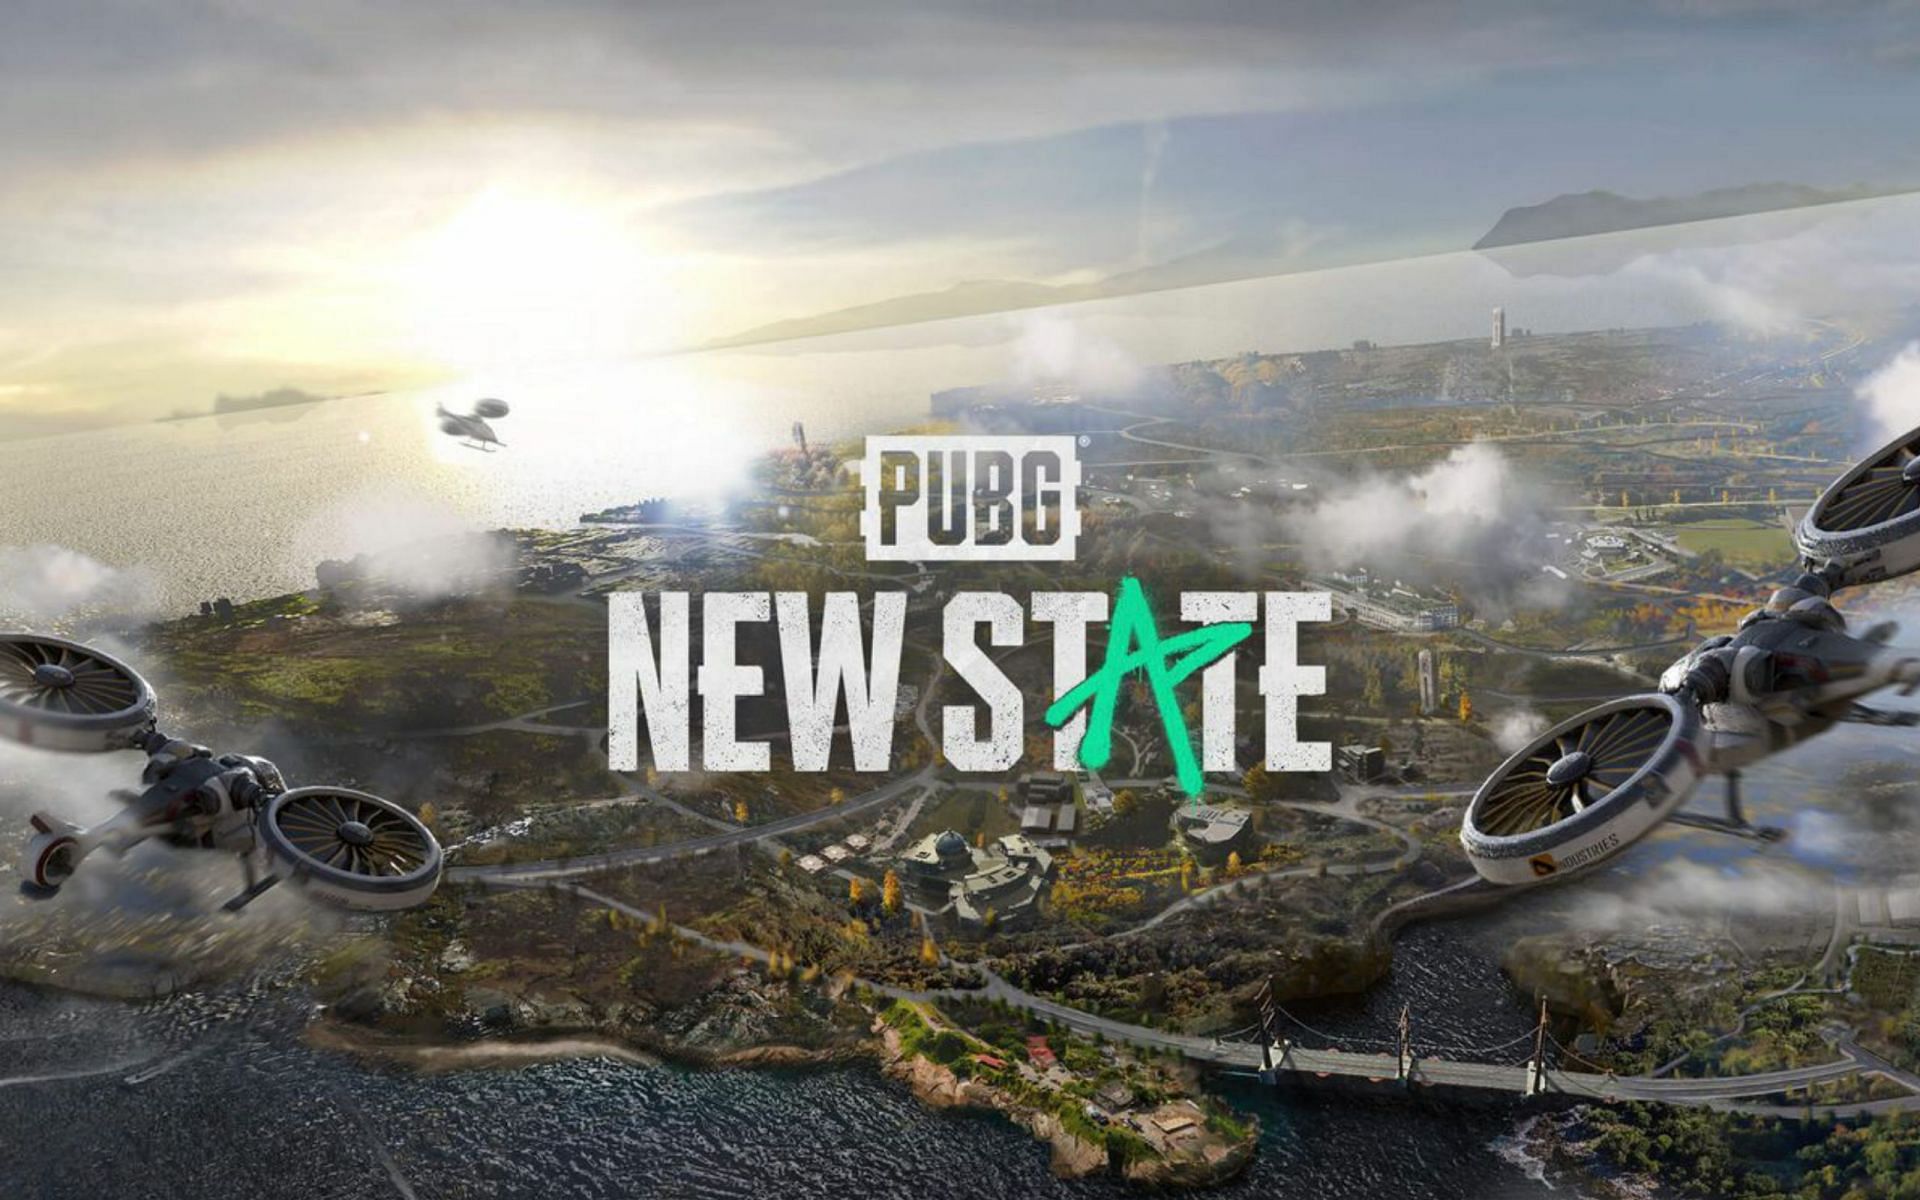 PUBG New State will be available at 6:00 am UTC (Image via PUBG New State)